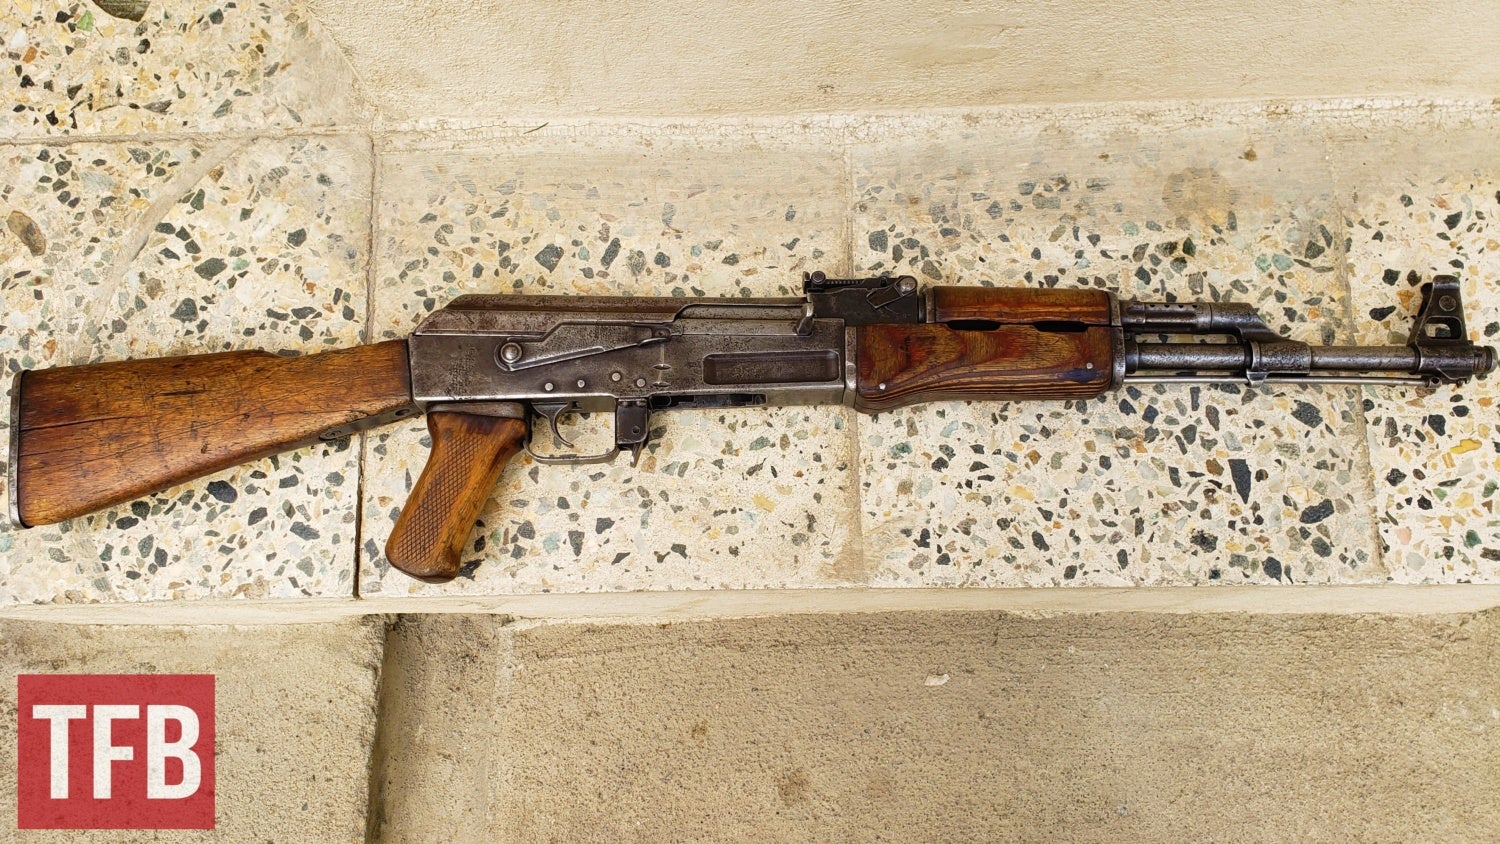 Typical Type 3 Soviet AK photographed in Kabul